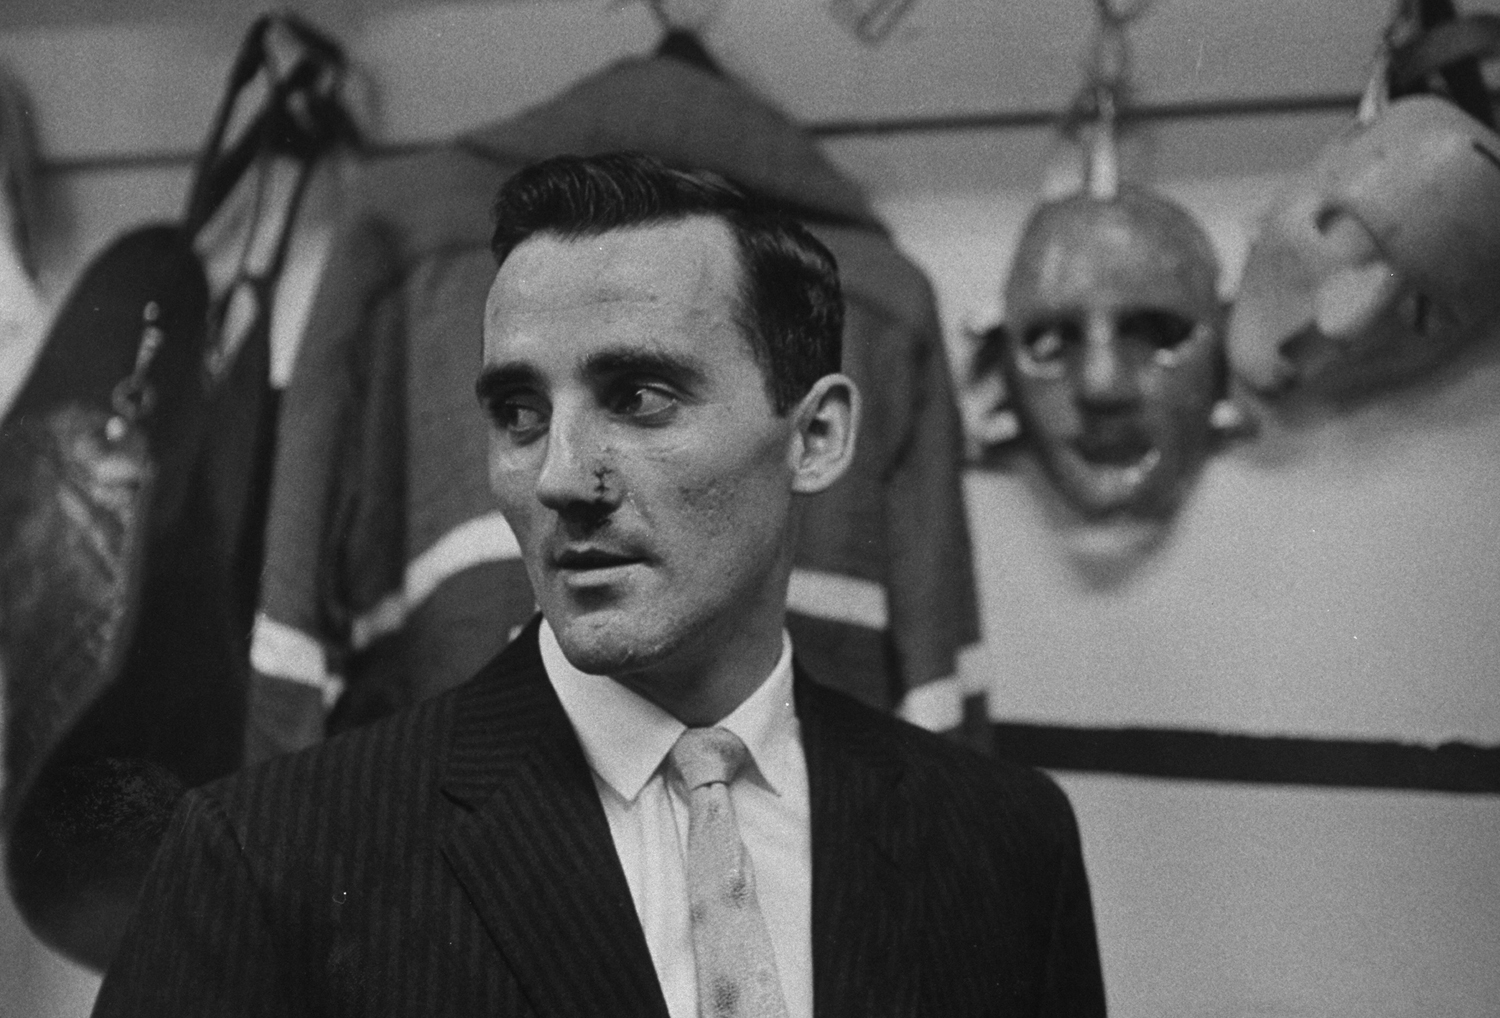 Montreal Canadiens goalie Jacques Plante, with facial stitches, 1959.